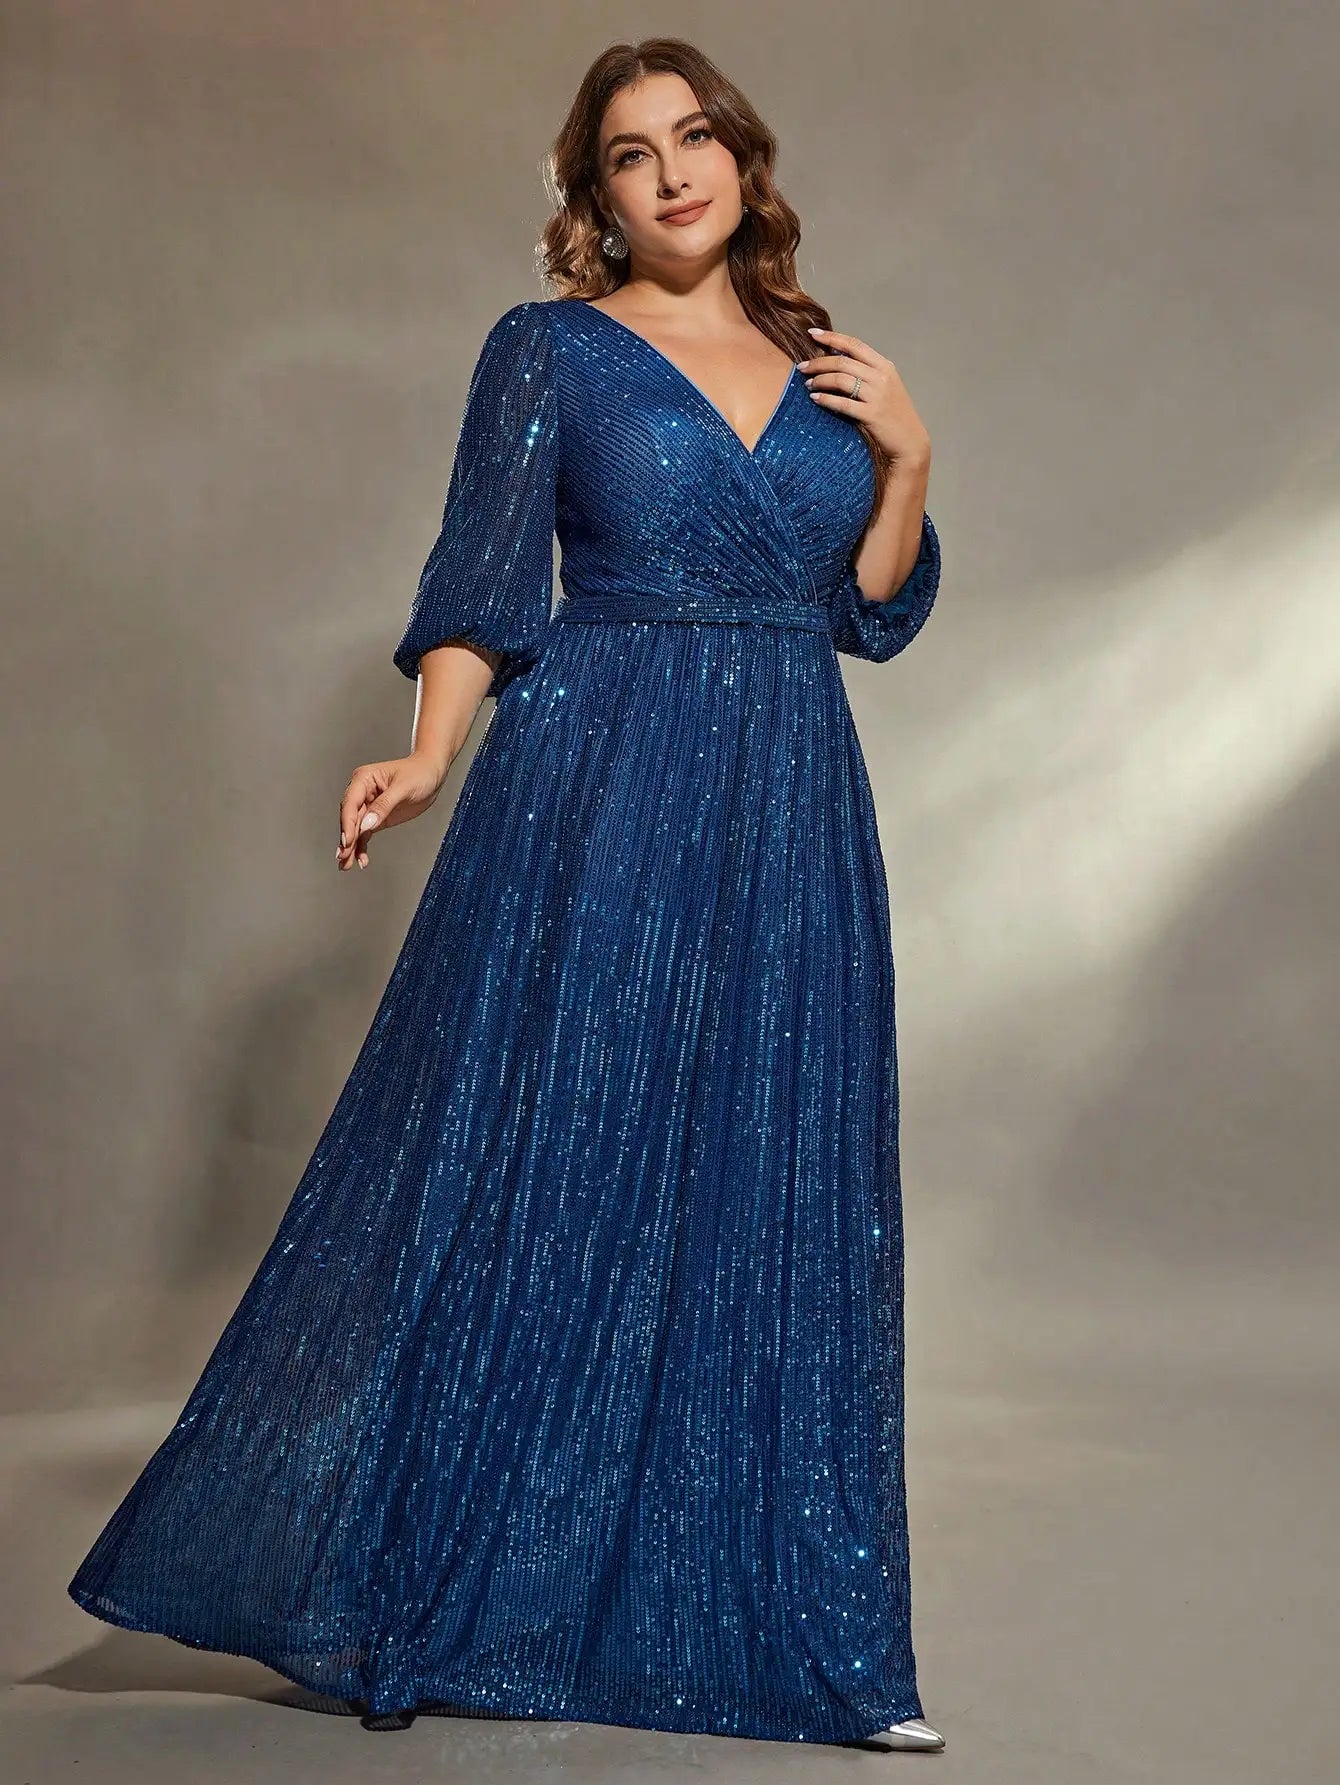 Mgiacy plus size V-neck bust pleated mid-long sleeve A-frame sequin long dress Evening gown PROM dress Party dress